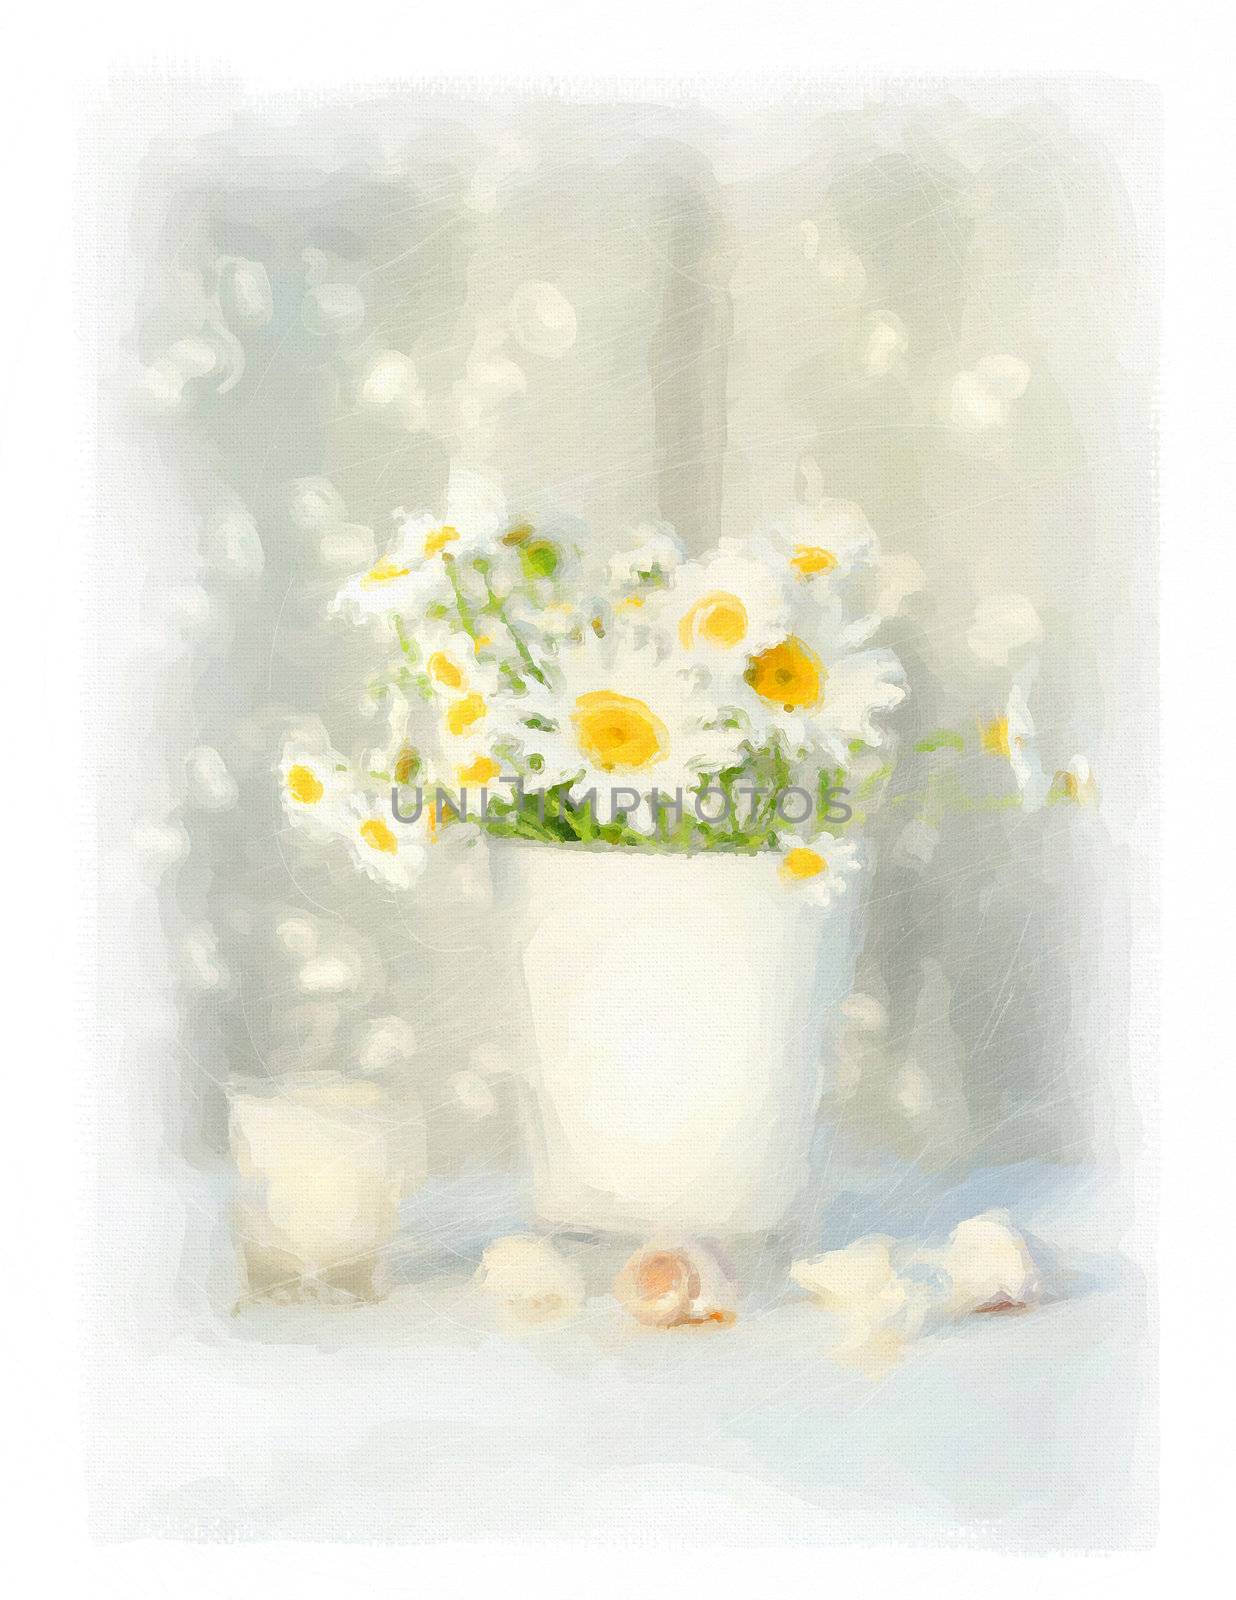 Digital watercolor of white daisies and seashells  by Sandralise